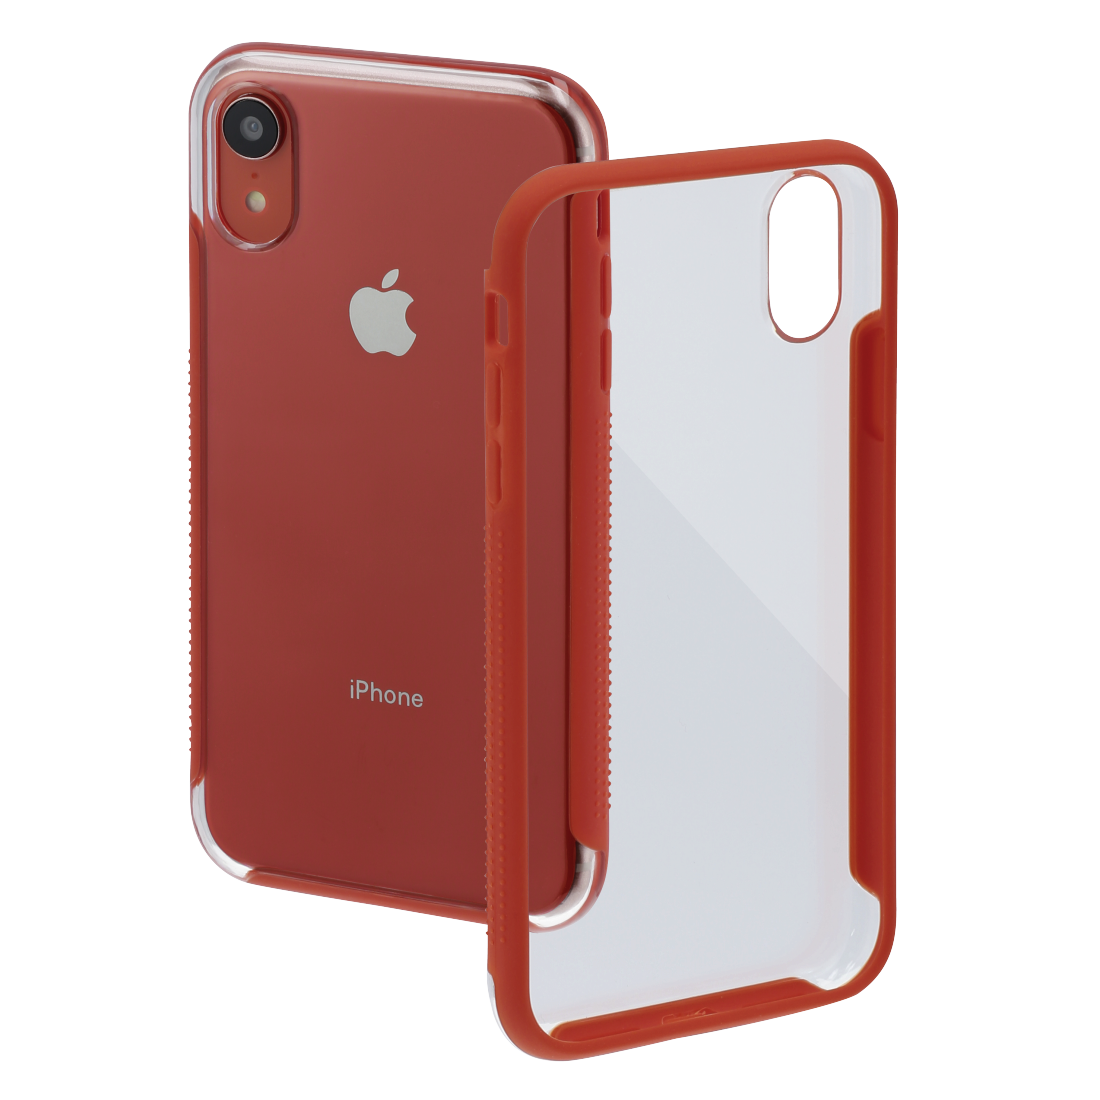 00185761 Hama "Frame" Cover for Apple iPhone XR, transparent/coral